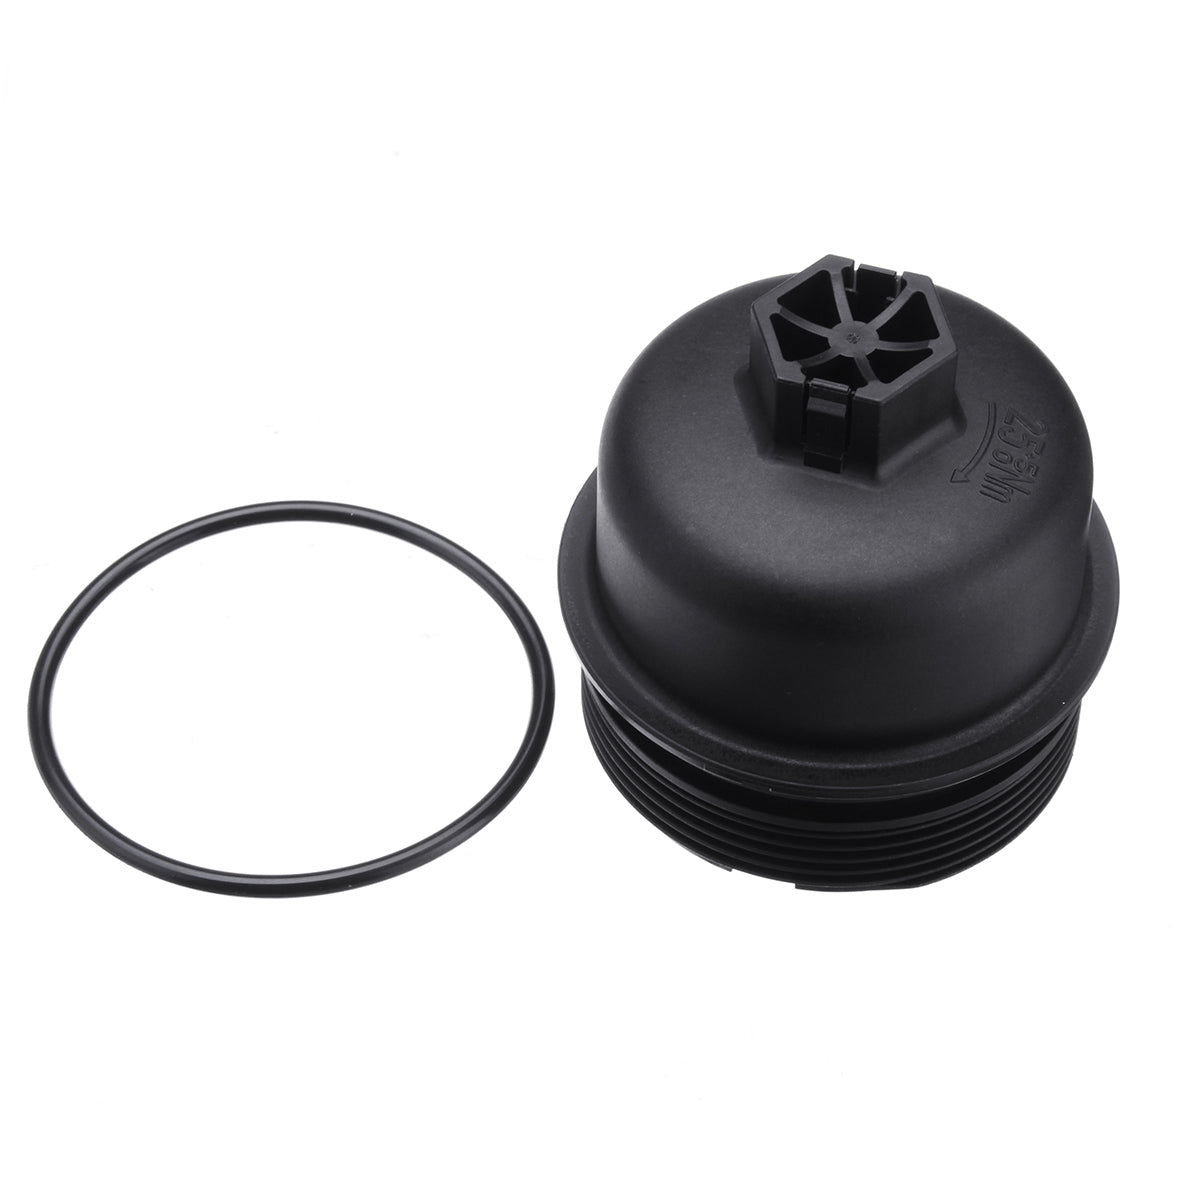 Dark Slate Gray Oil Filter Lid Housing Top Cover Cap For Ford Transit MK7 Galaxy Mondeo Focus